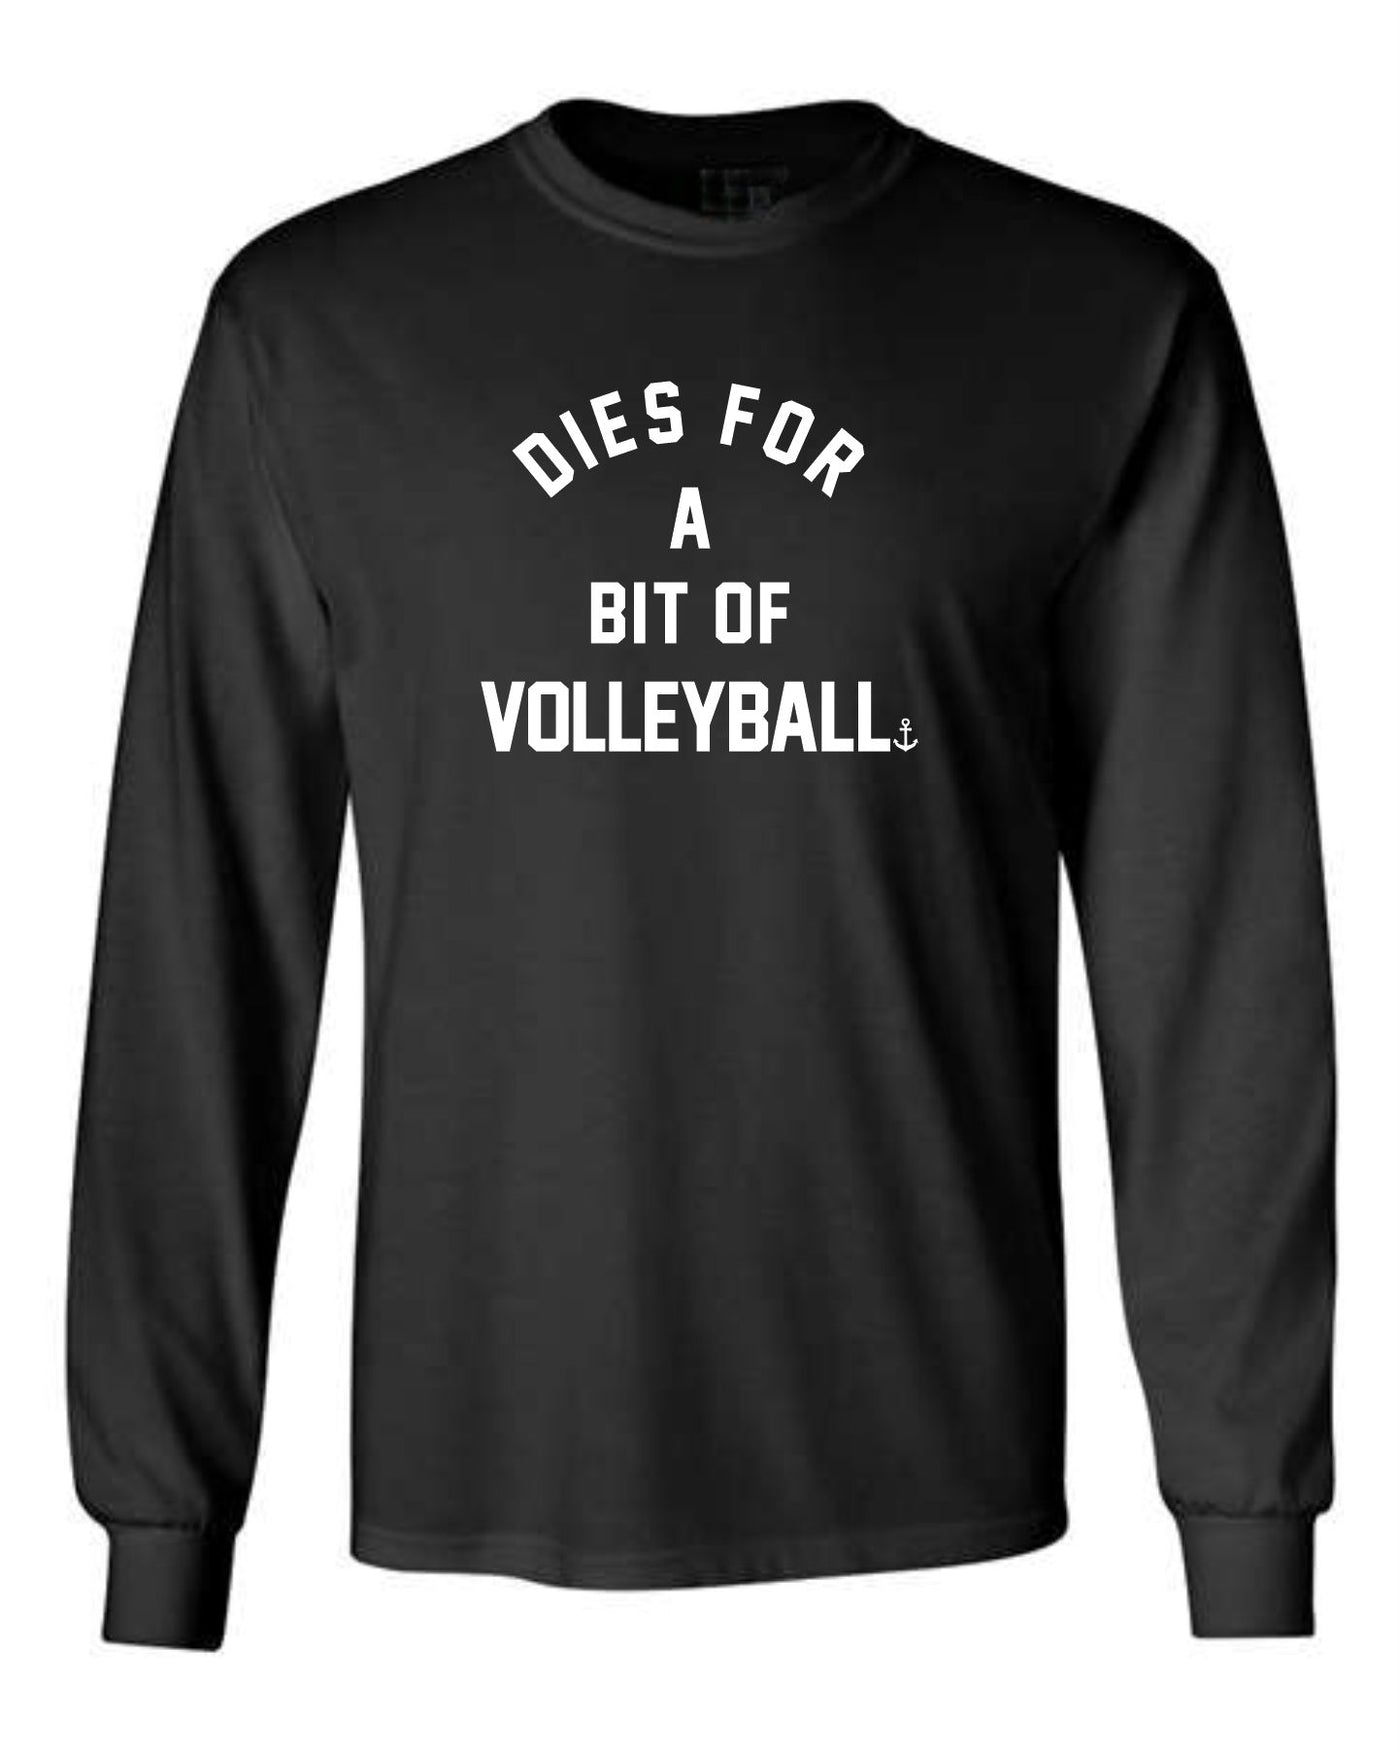 "Dies For A Bit Of Volleyball" Unisex Long Sleeve Shirt